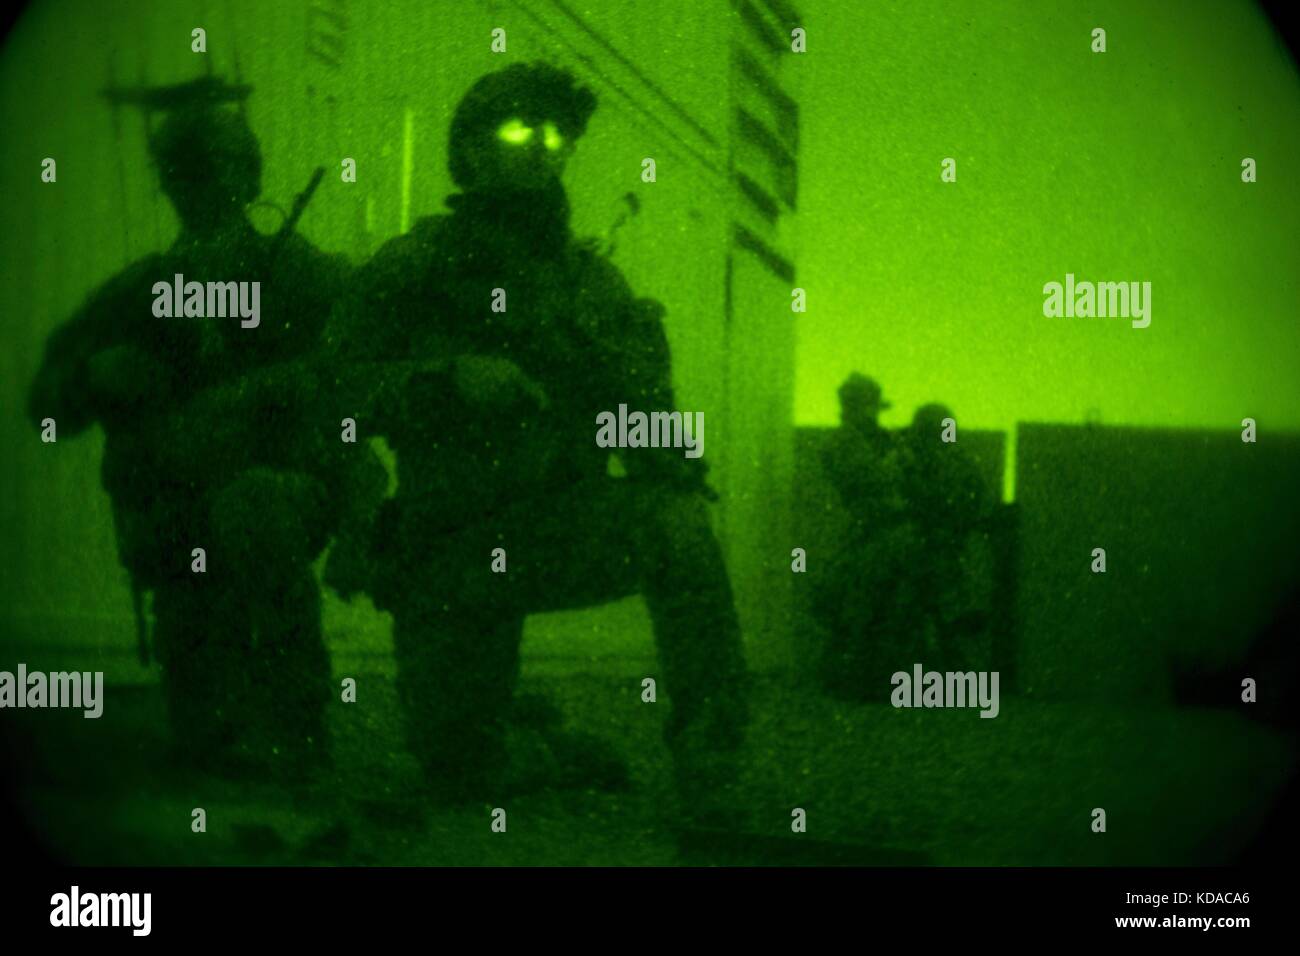 U.S. Marine Corps soldiers provide security through night vision goggles during visit, board, search and seizure training for the Company Collective Exercise at the Marine Corps Base Camp Pendleton October 15, 2015 in San Diego, California. Stock Photo